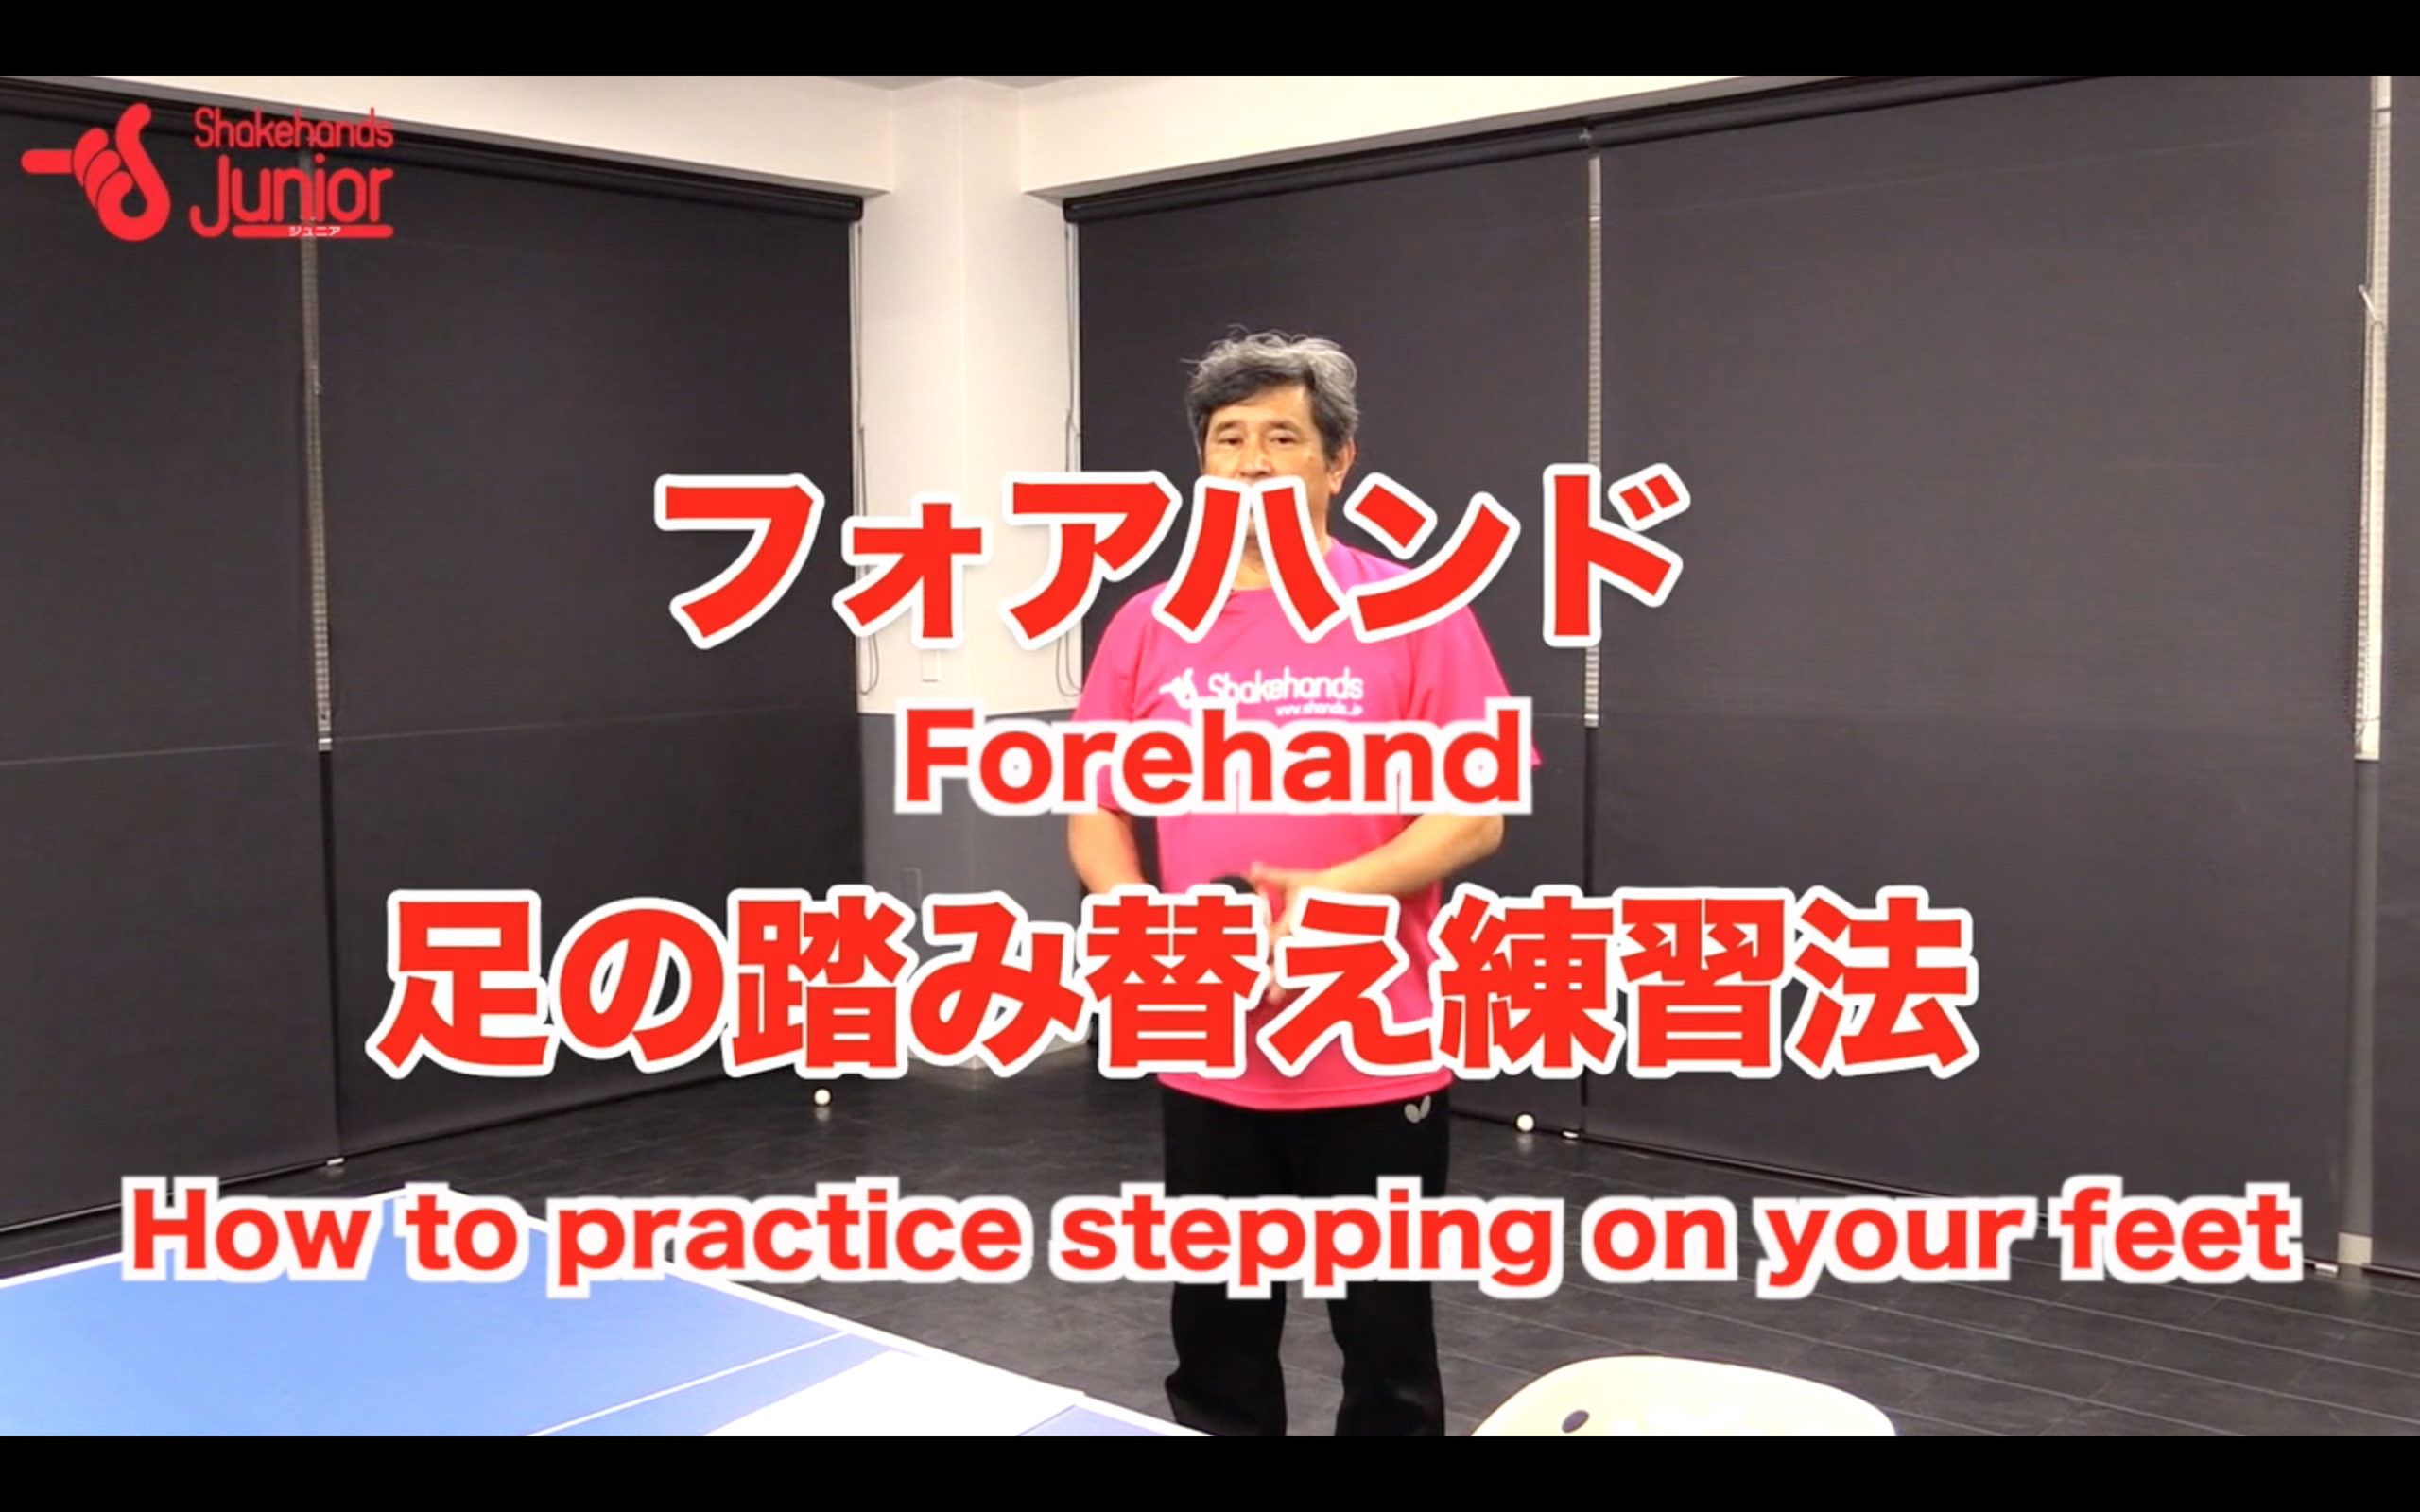 How to practice stepping on your feet